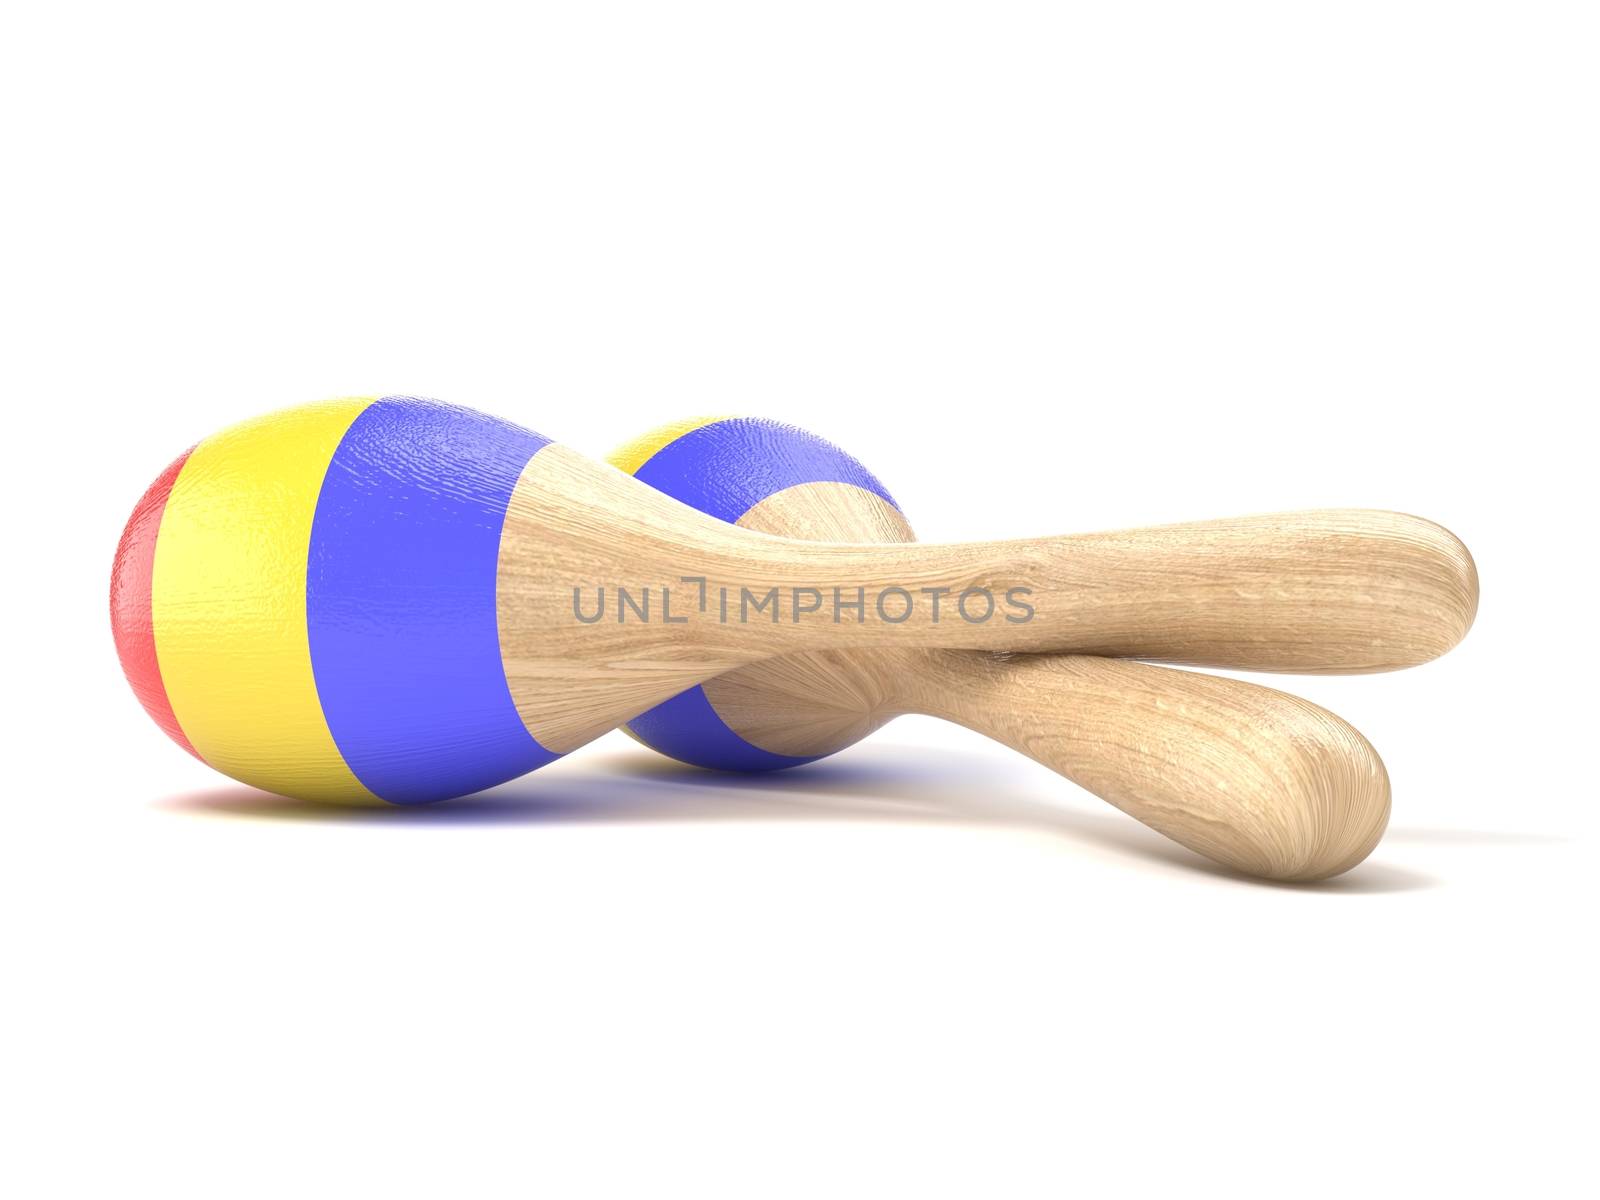 Wooden toy maracas. 3D render illustration isolated on white background